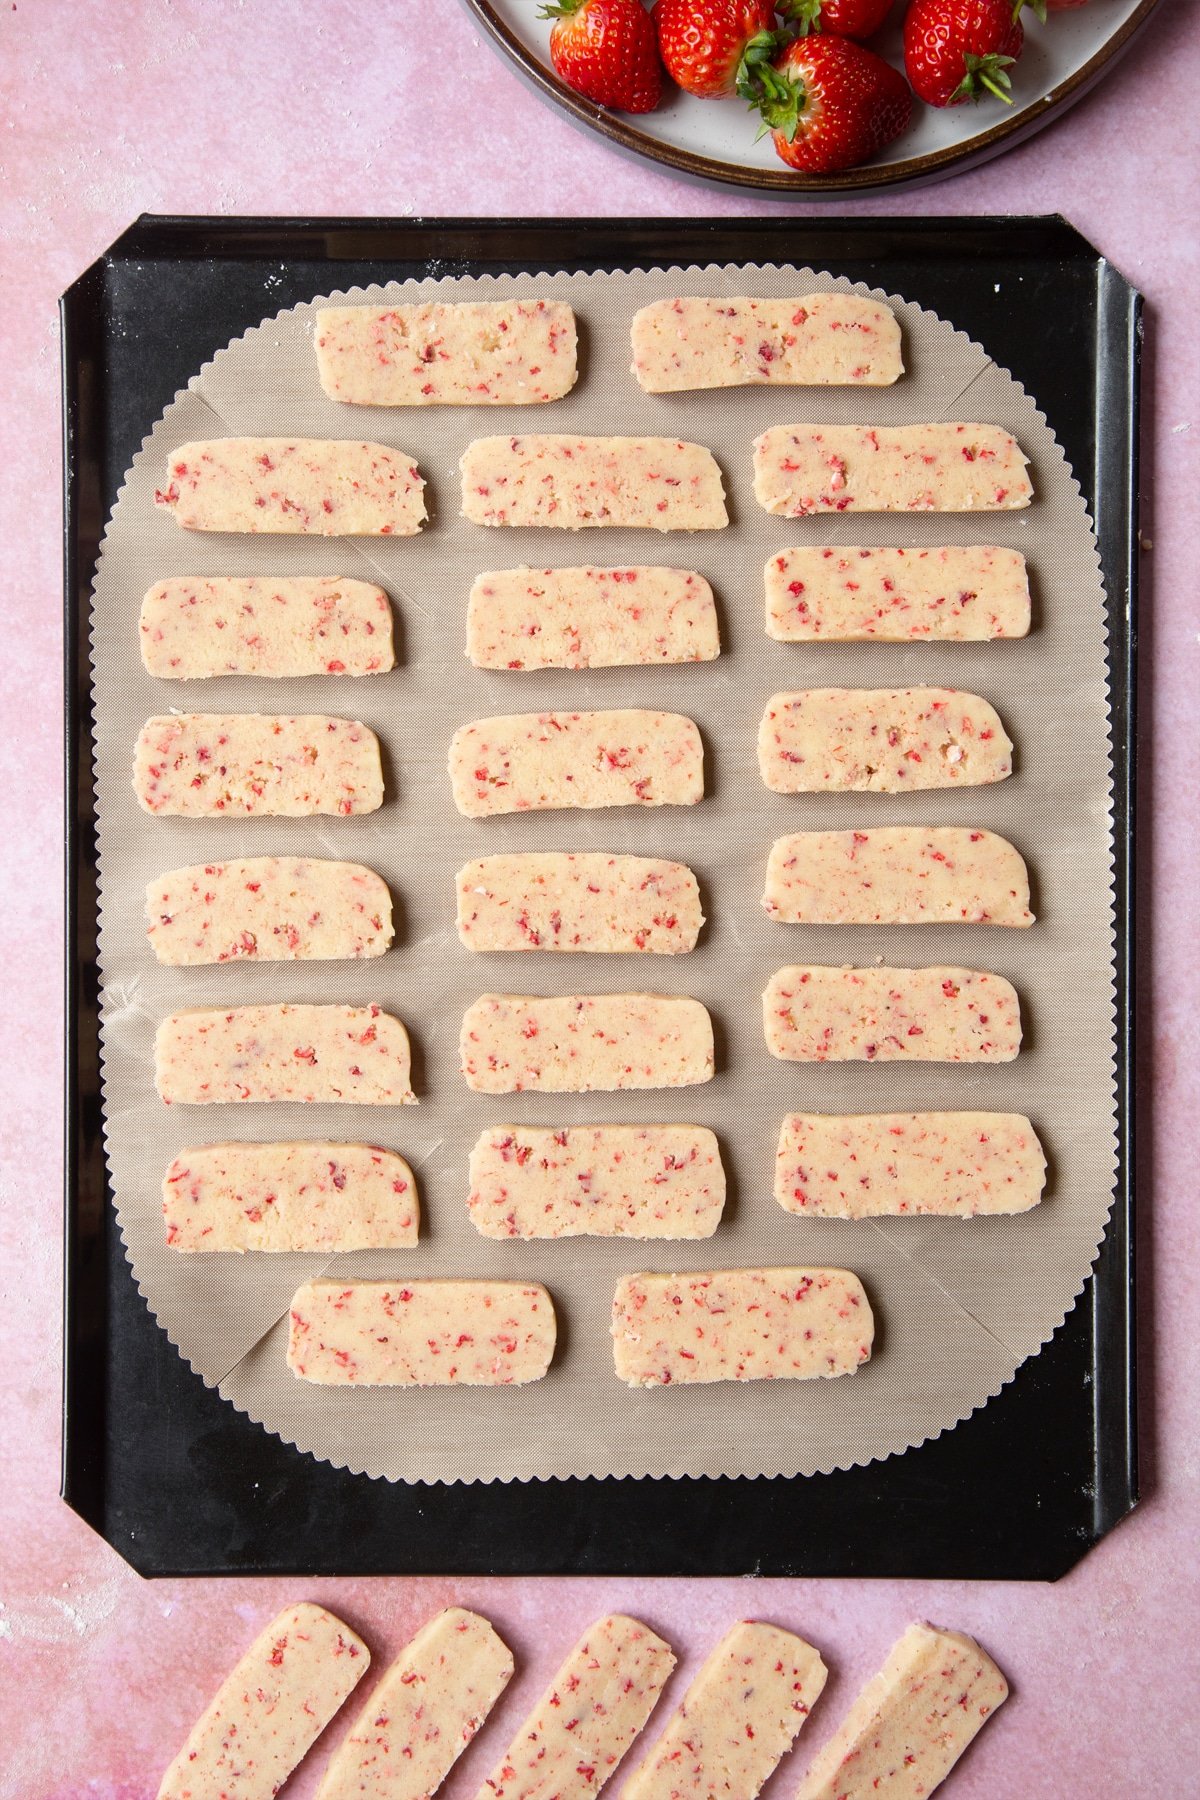 The strawberry biscuit dough is placed onto a baking sheet.